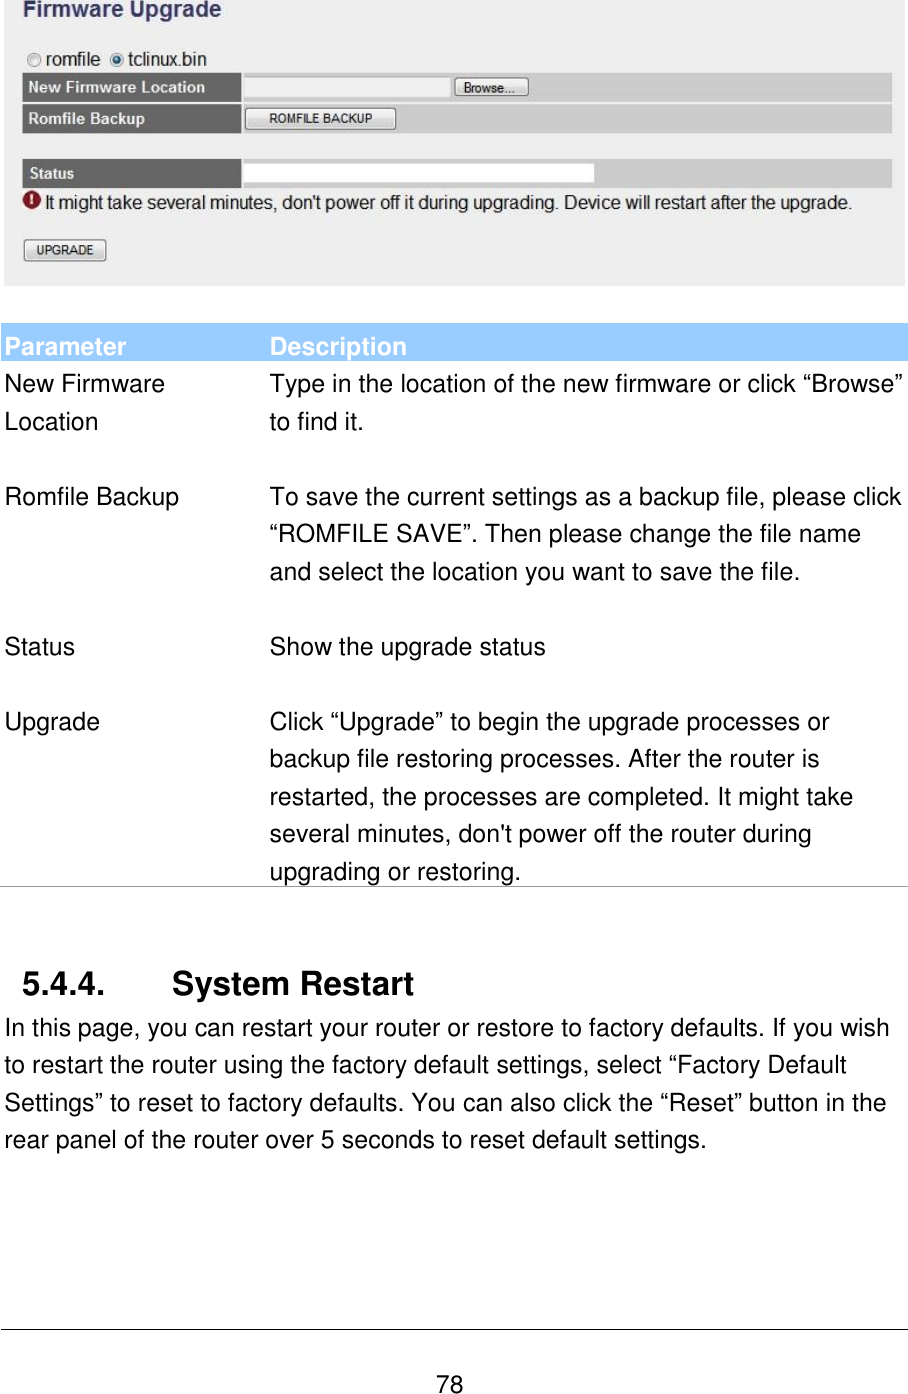   78   Parameter Description New Firmware Location Type in the location of the new firmware or click “Browse” to find it.   Romfile Backup To save the current settings as a backup file, please click “ROMFILE SAVE”. Then please change the file name and select the location you want to save the file.   Status Show the upgrade status   Upgrade Click “Upgrade” to begin the upgrade processes or backup file restoring processes. After the router is restarted, the processes are completed. It might take several minutes, don&apos;t power off the router during upgrading or restoring.   5.4.4.  System Restart In this page, you can restart your router or restore to factory defaults. If you wish to restart the router using the factory default settings, select “Factory Default Settings” to reset to factory defaults. You can also click the “Reset” button in the rear panel of the router over 5 seconds to reset default settings.  